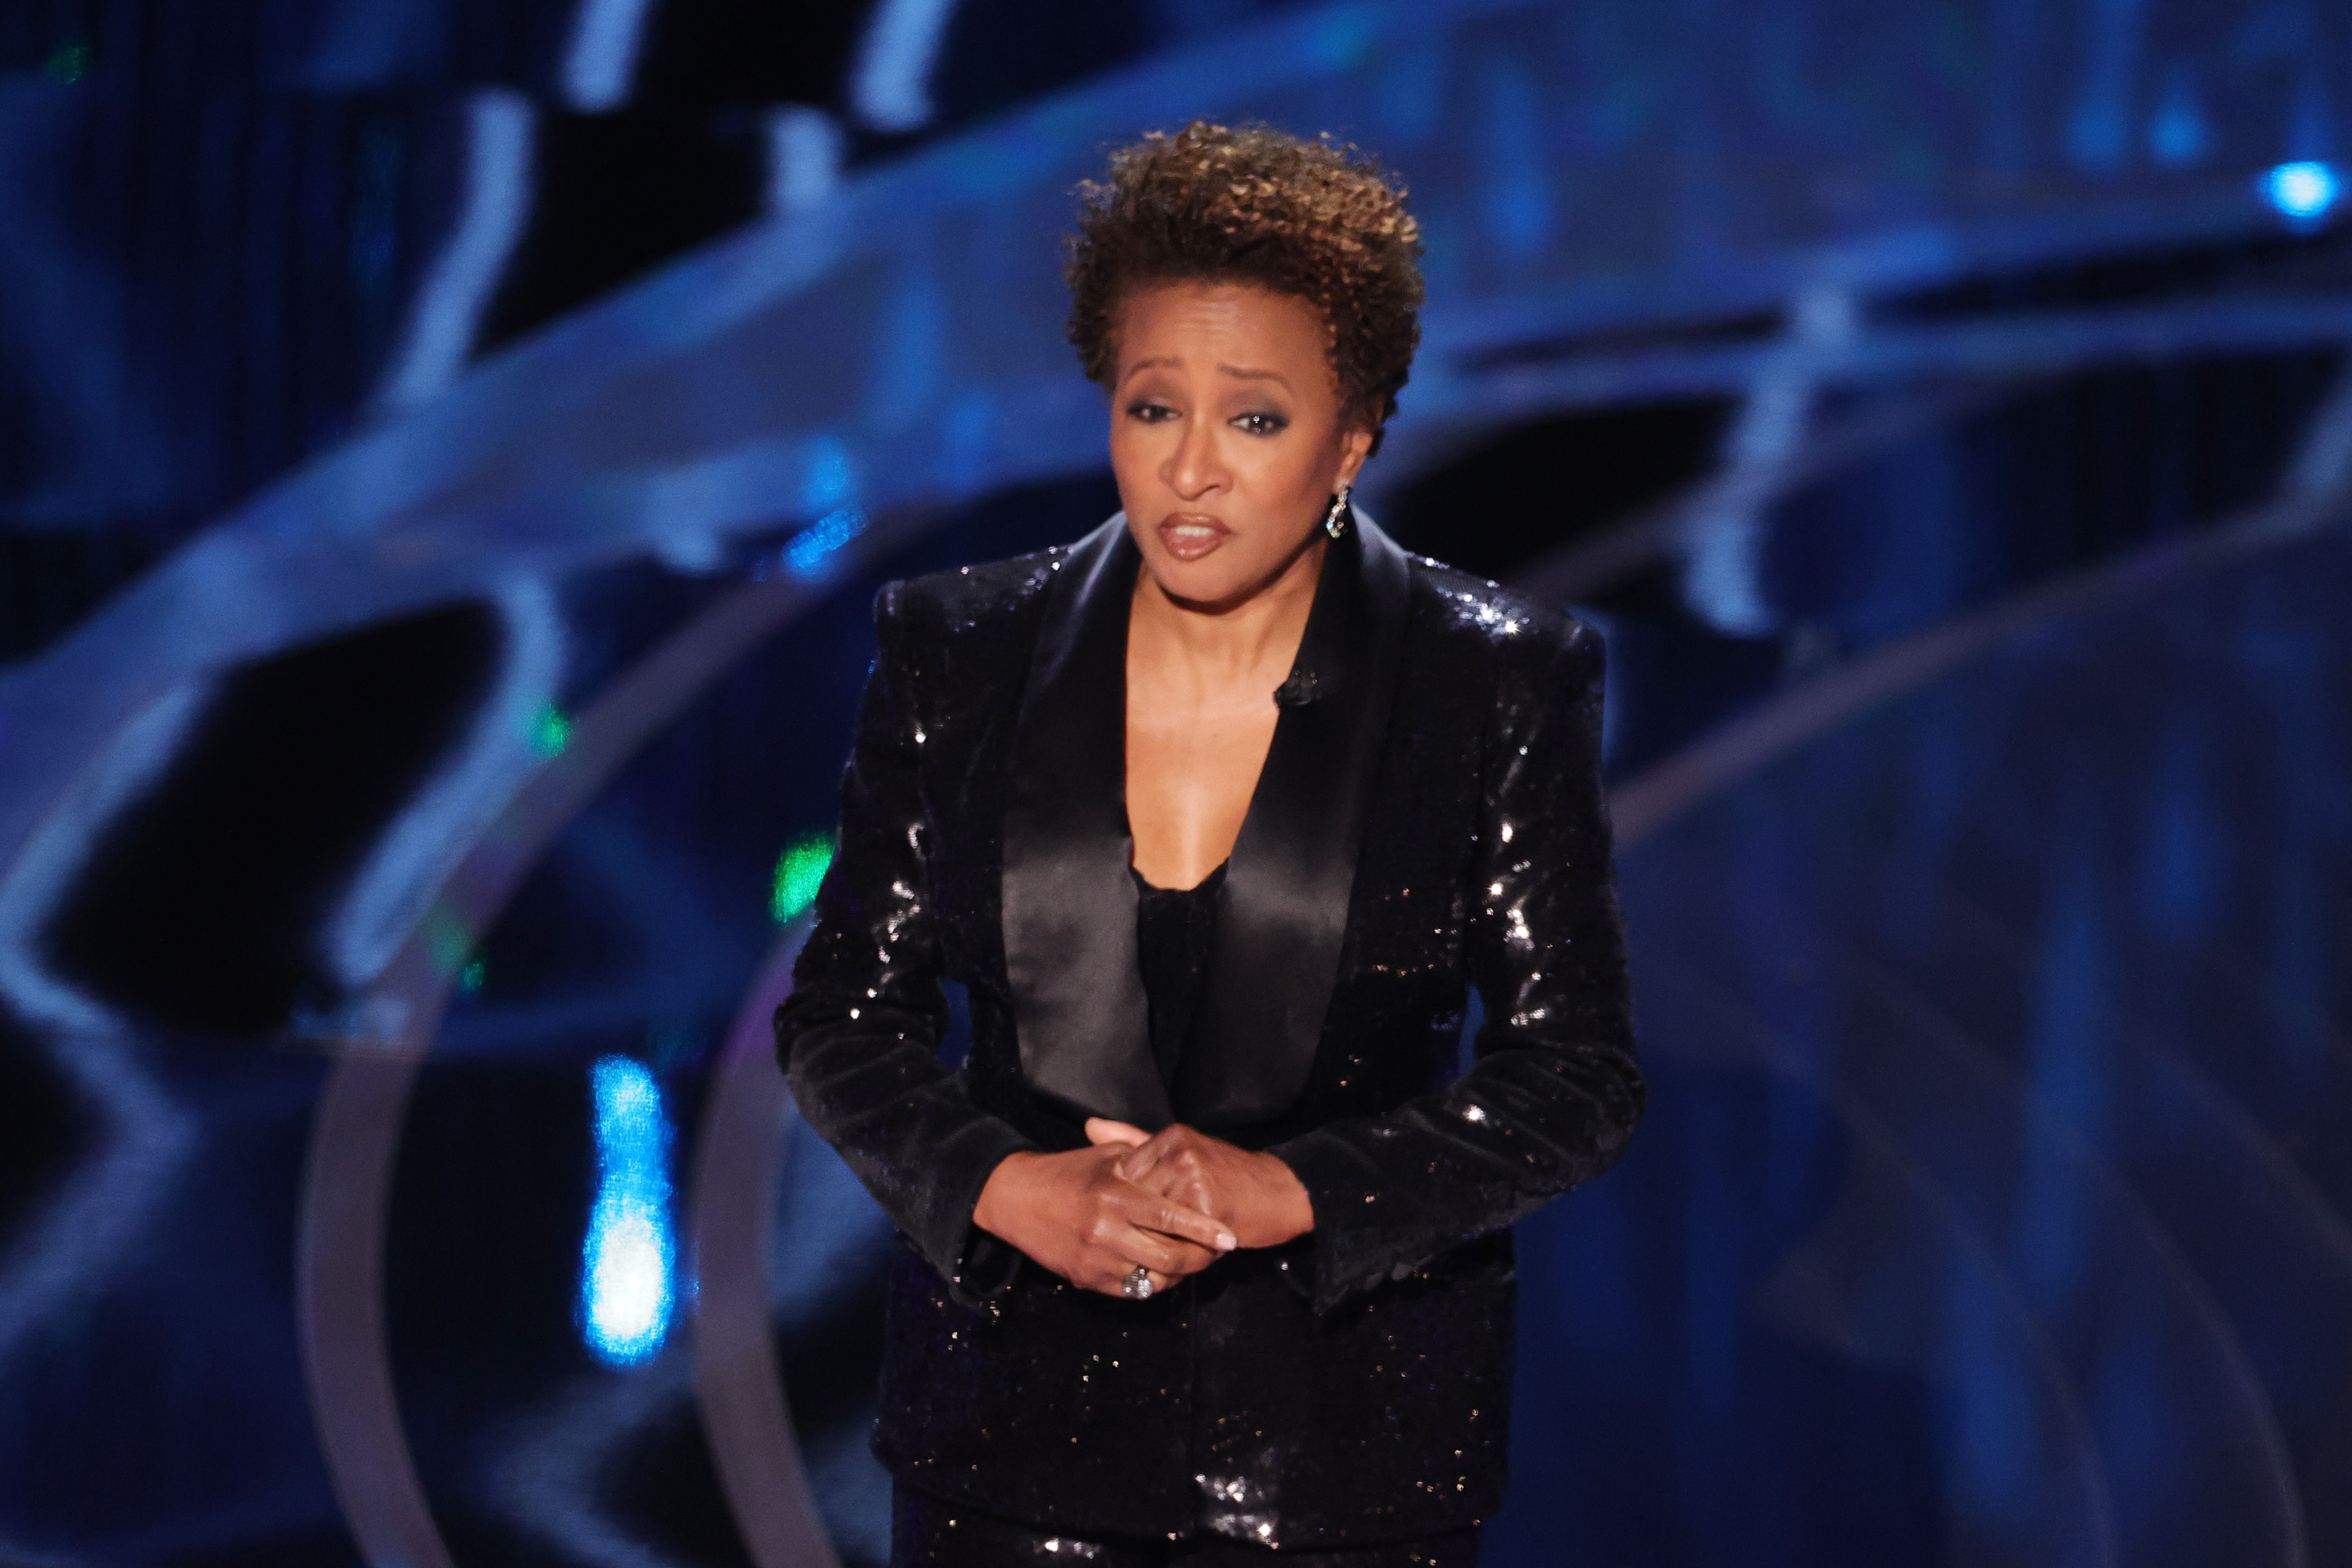 Wanda Sykes hosts the 94th Oscars where Chris Rock had an incident with Will Smith